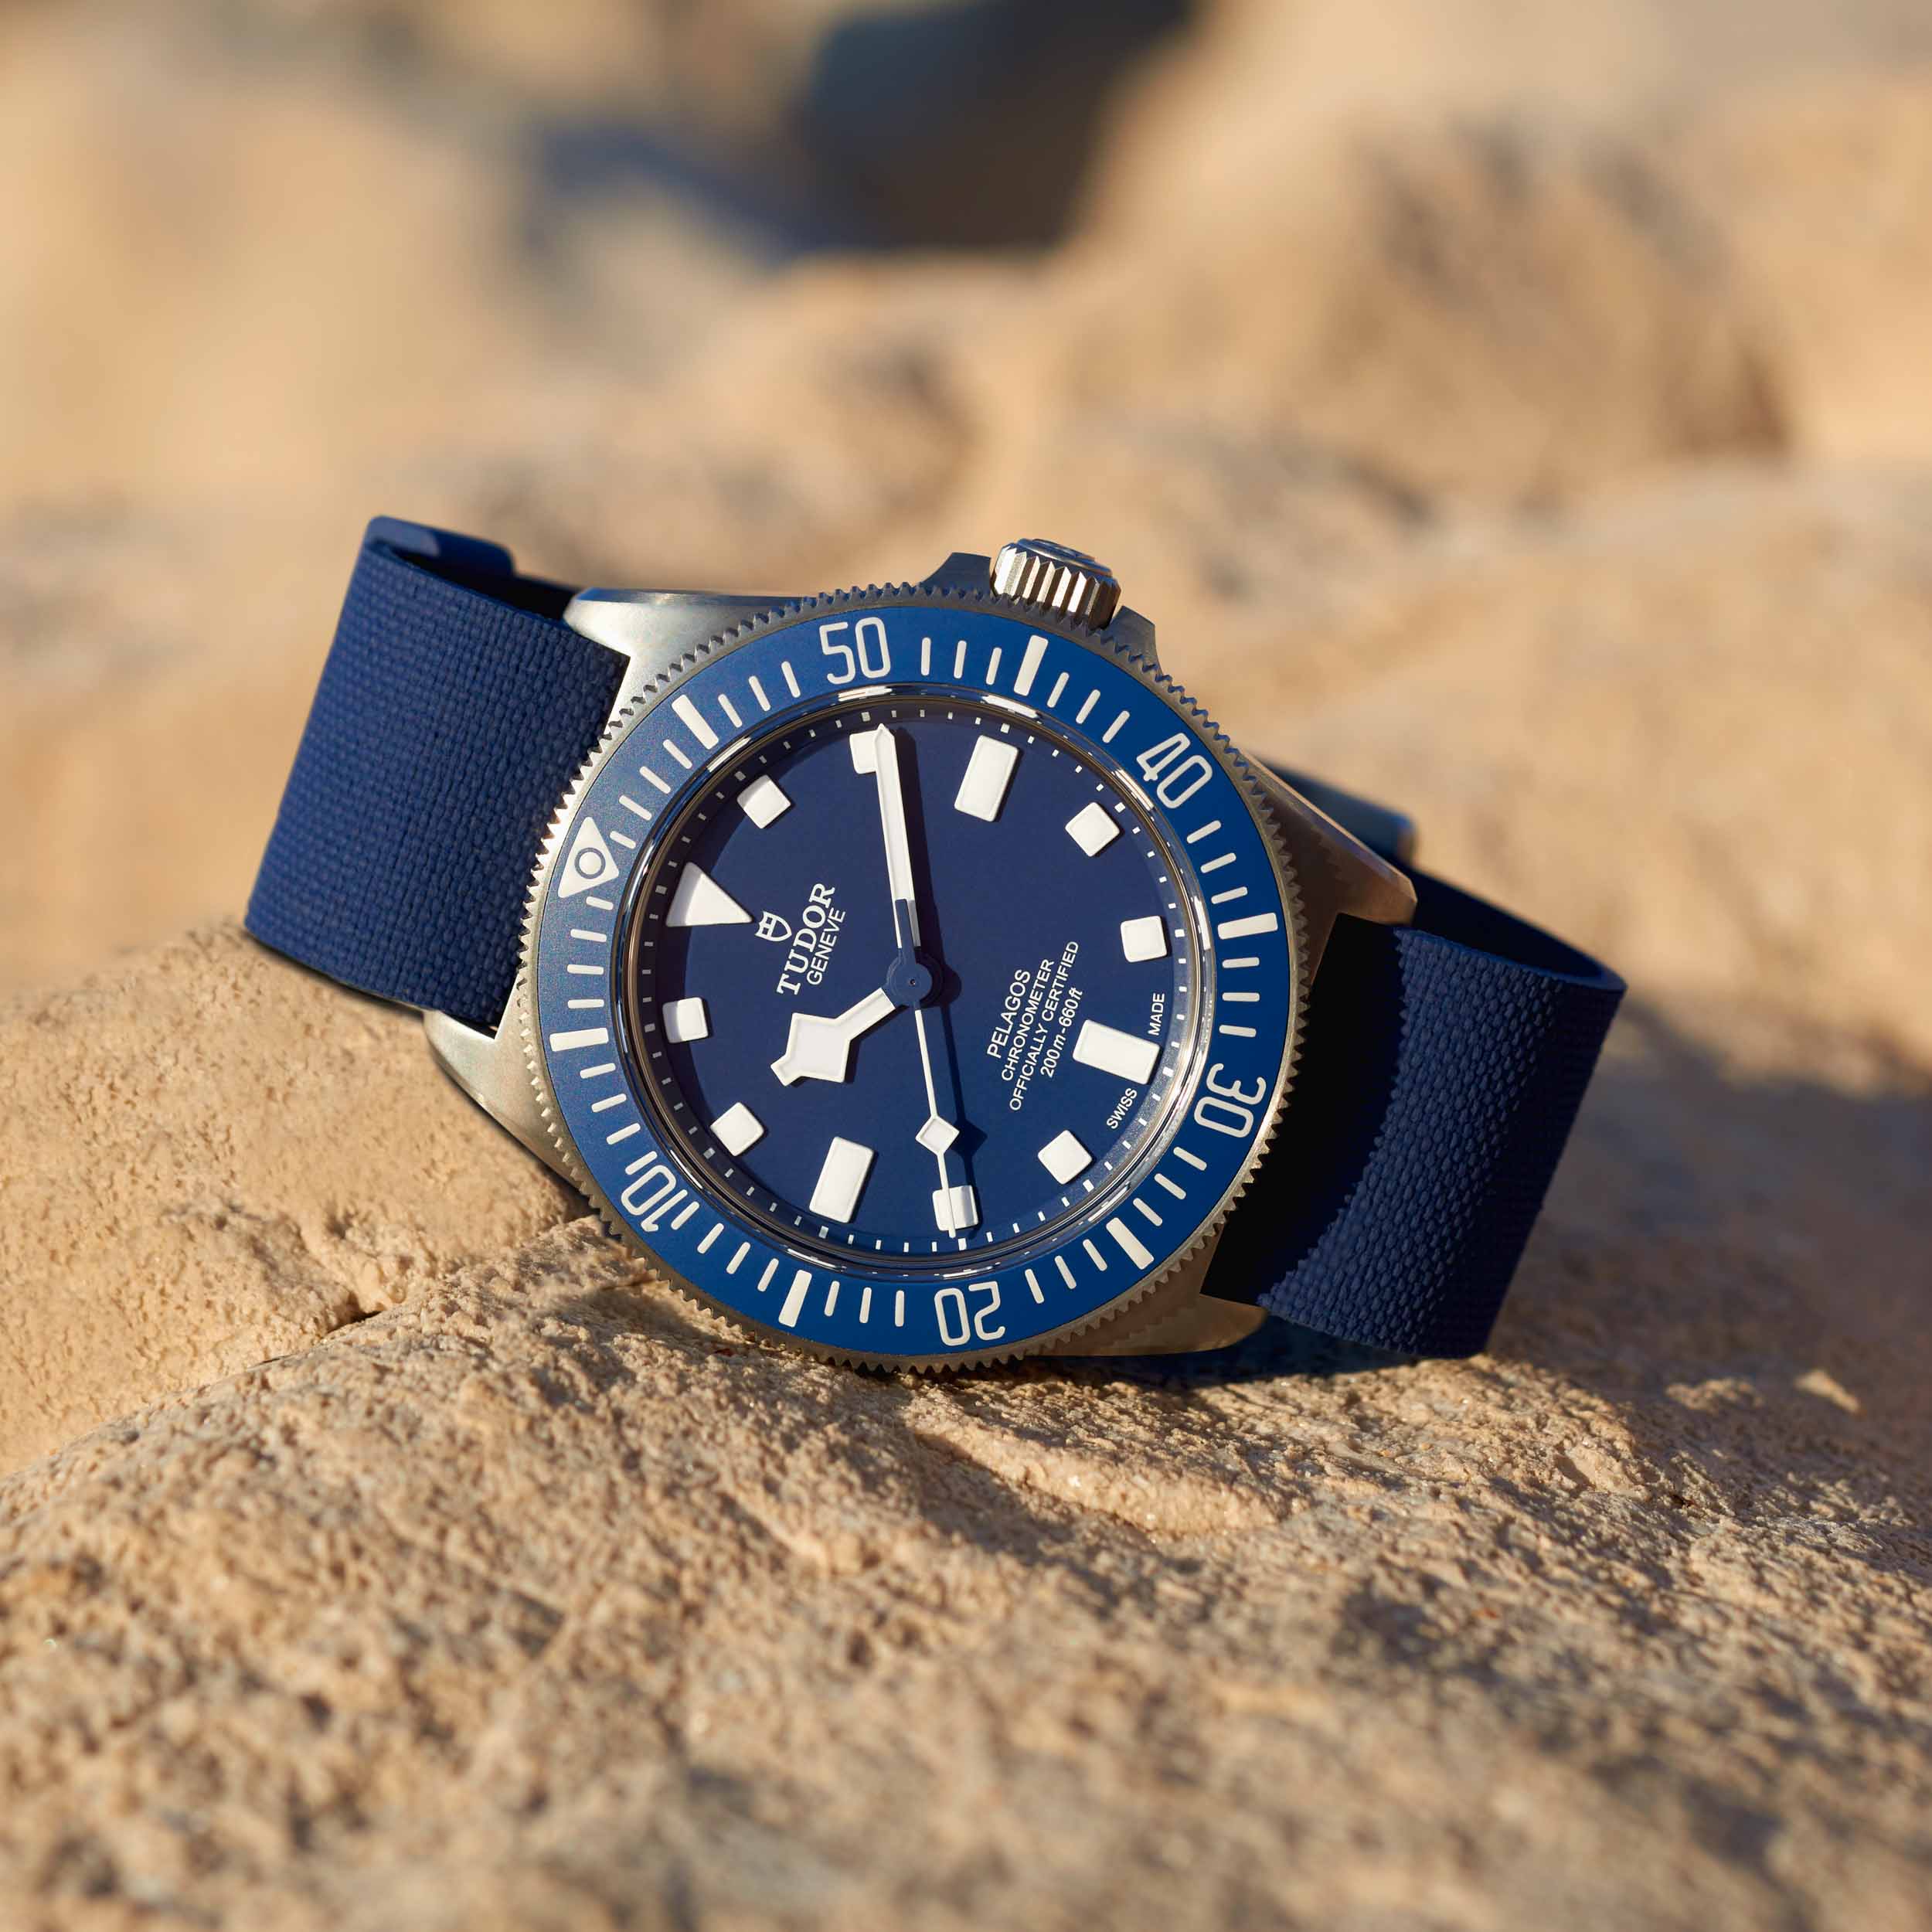 Tudor Pelagos FXD on the navy blue rubber strap with woven motif and titanium buckle